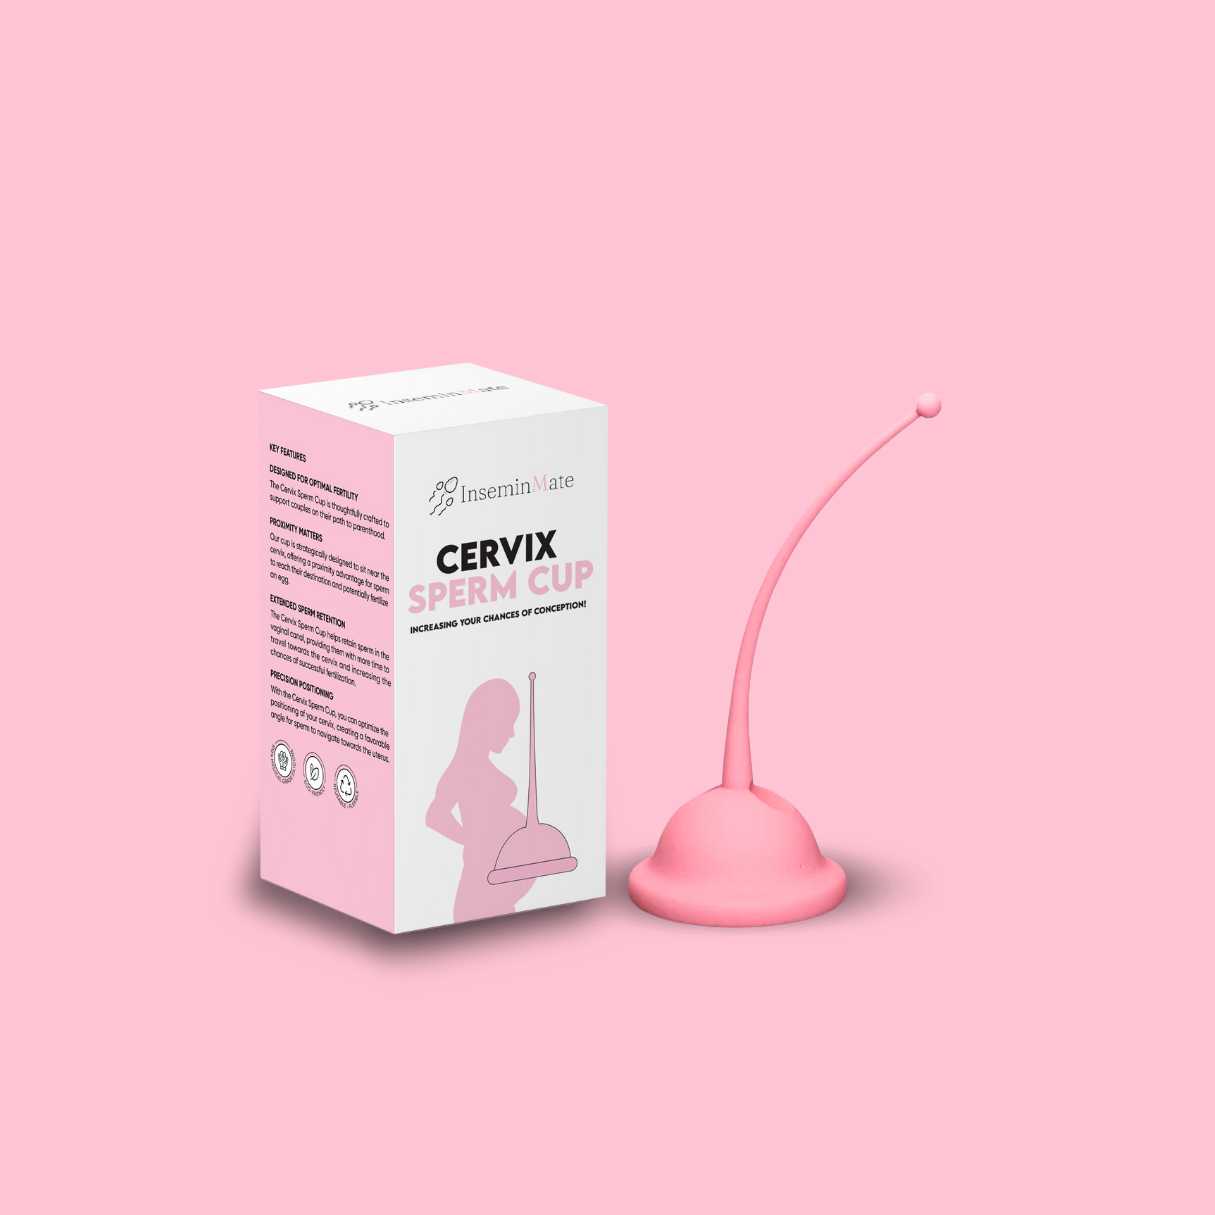 Cervix sperm cup or conception cup to increase chances of conceiving